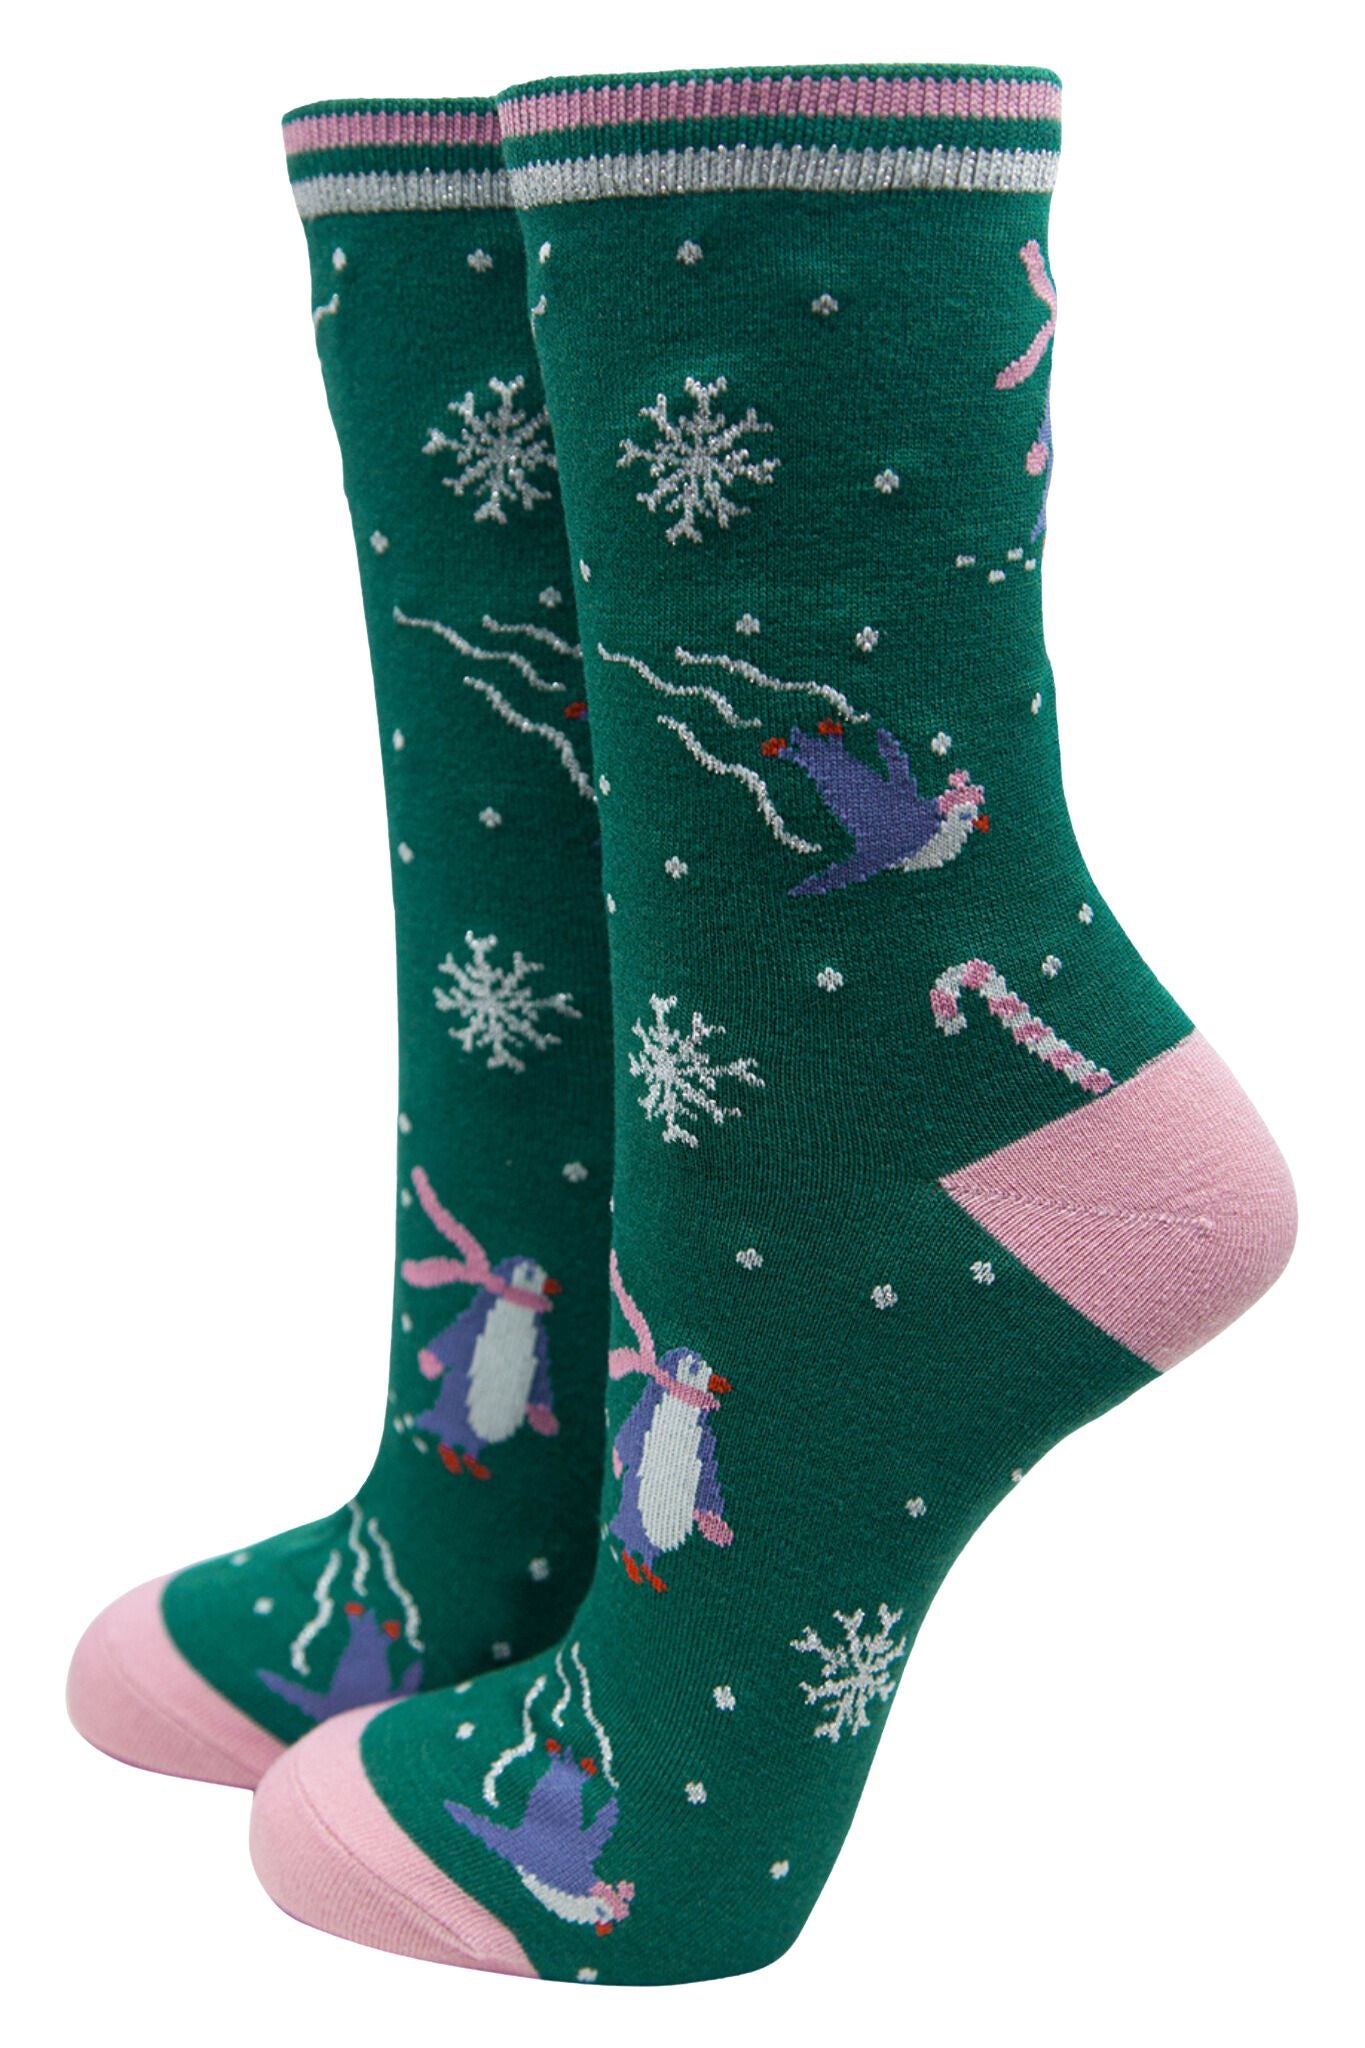 green bamboo socks with skating penguins and silver glitter acceents